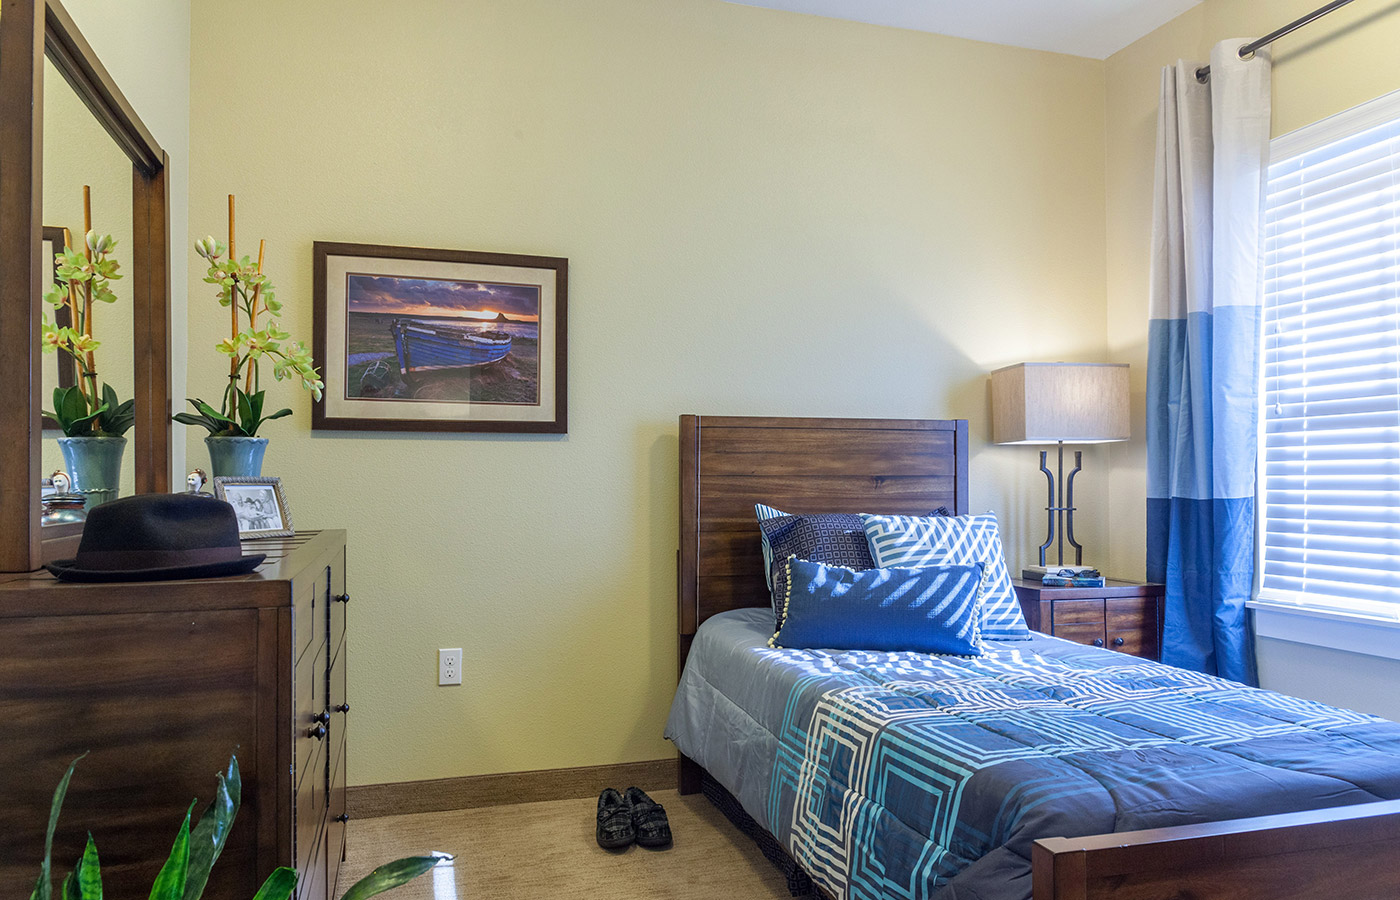 Bedroom in one of the apartment at The  Caliche Senior Living.